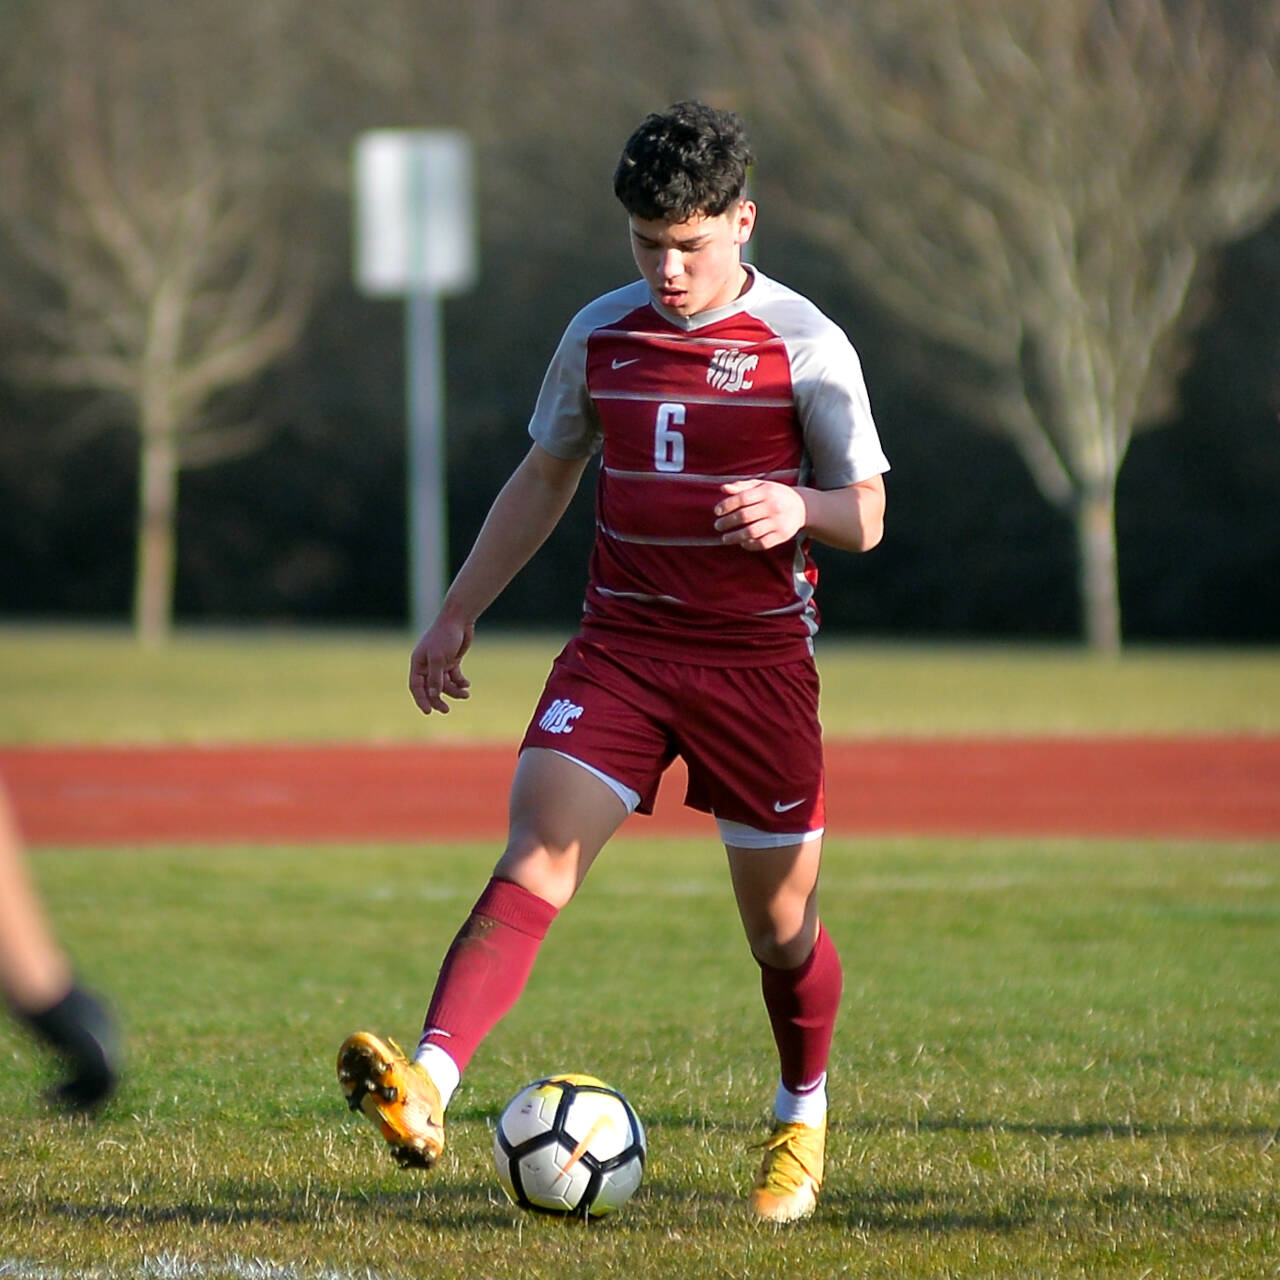 DAILY WORLD FILE PHOTO Hoquiam midfielder Brannon Gonzales scored two goals in the Grizzlies’ 2-1 win over Elma on Monday in Elma.